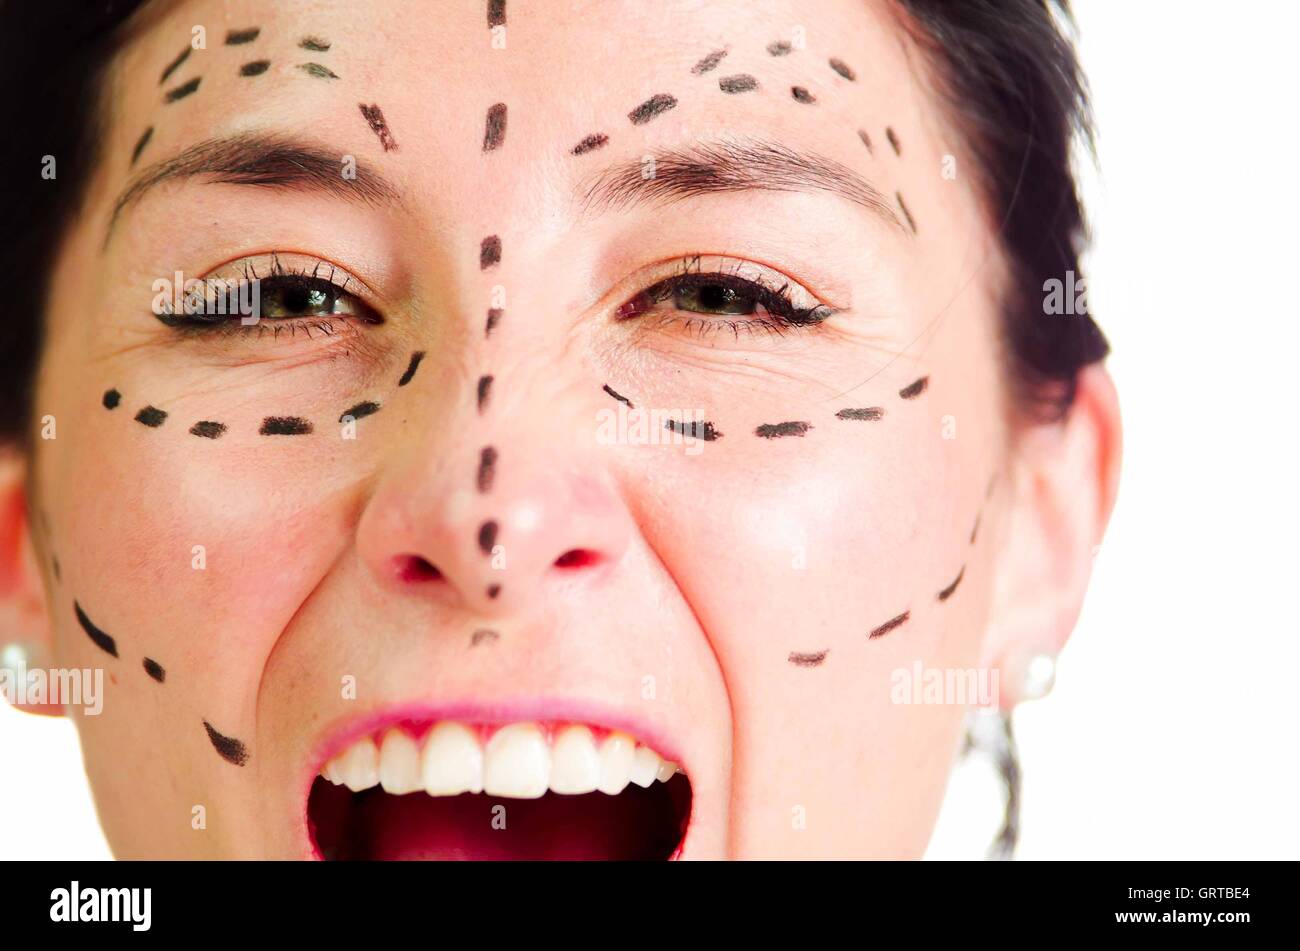 Closeup headshot caucasian woman with dotted lines drawn around face looking into camera, preparing cosmetic surgery, screaming facial expression Stock Photo